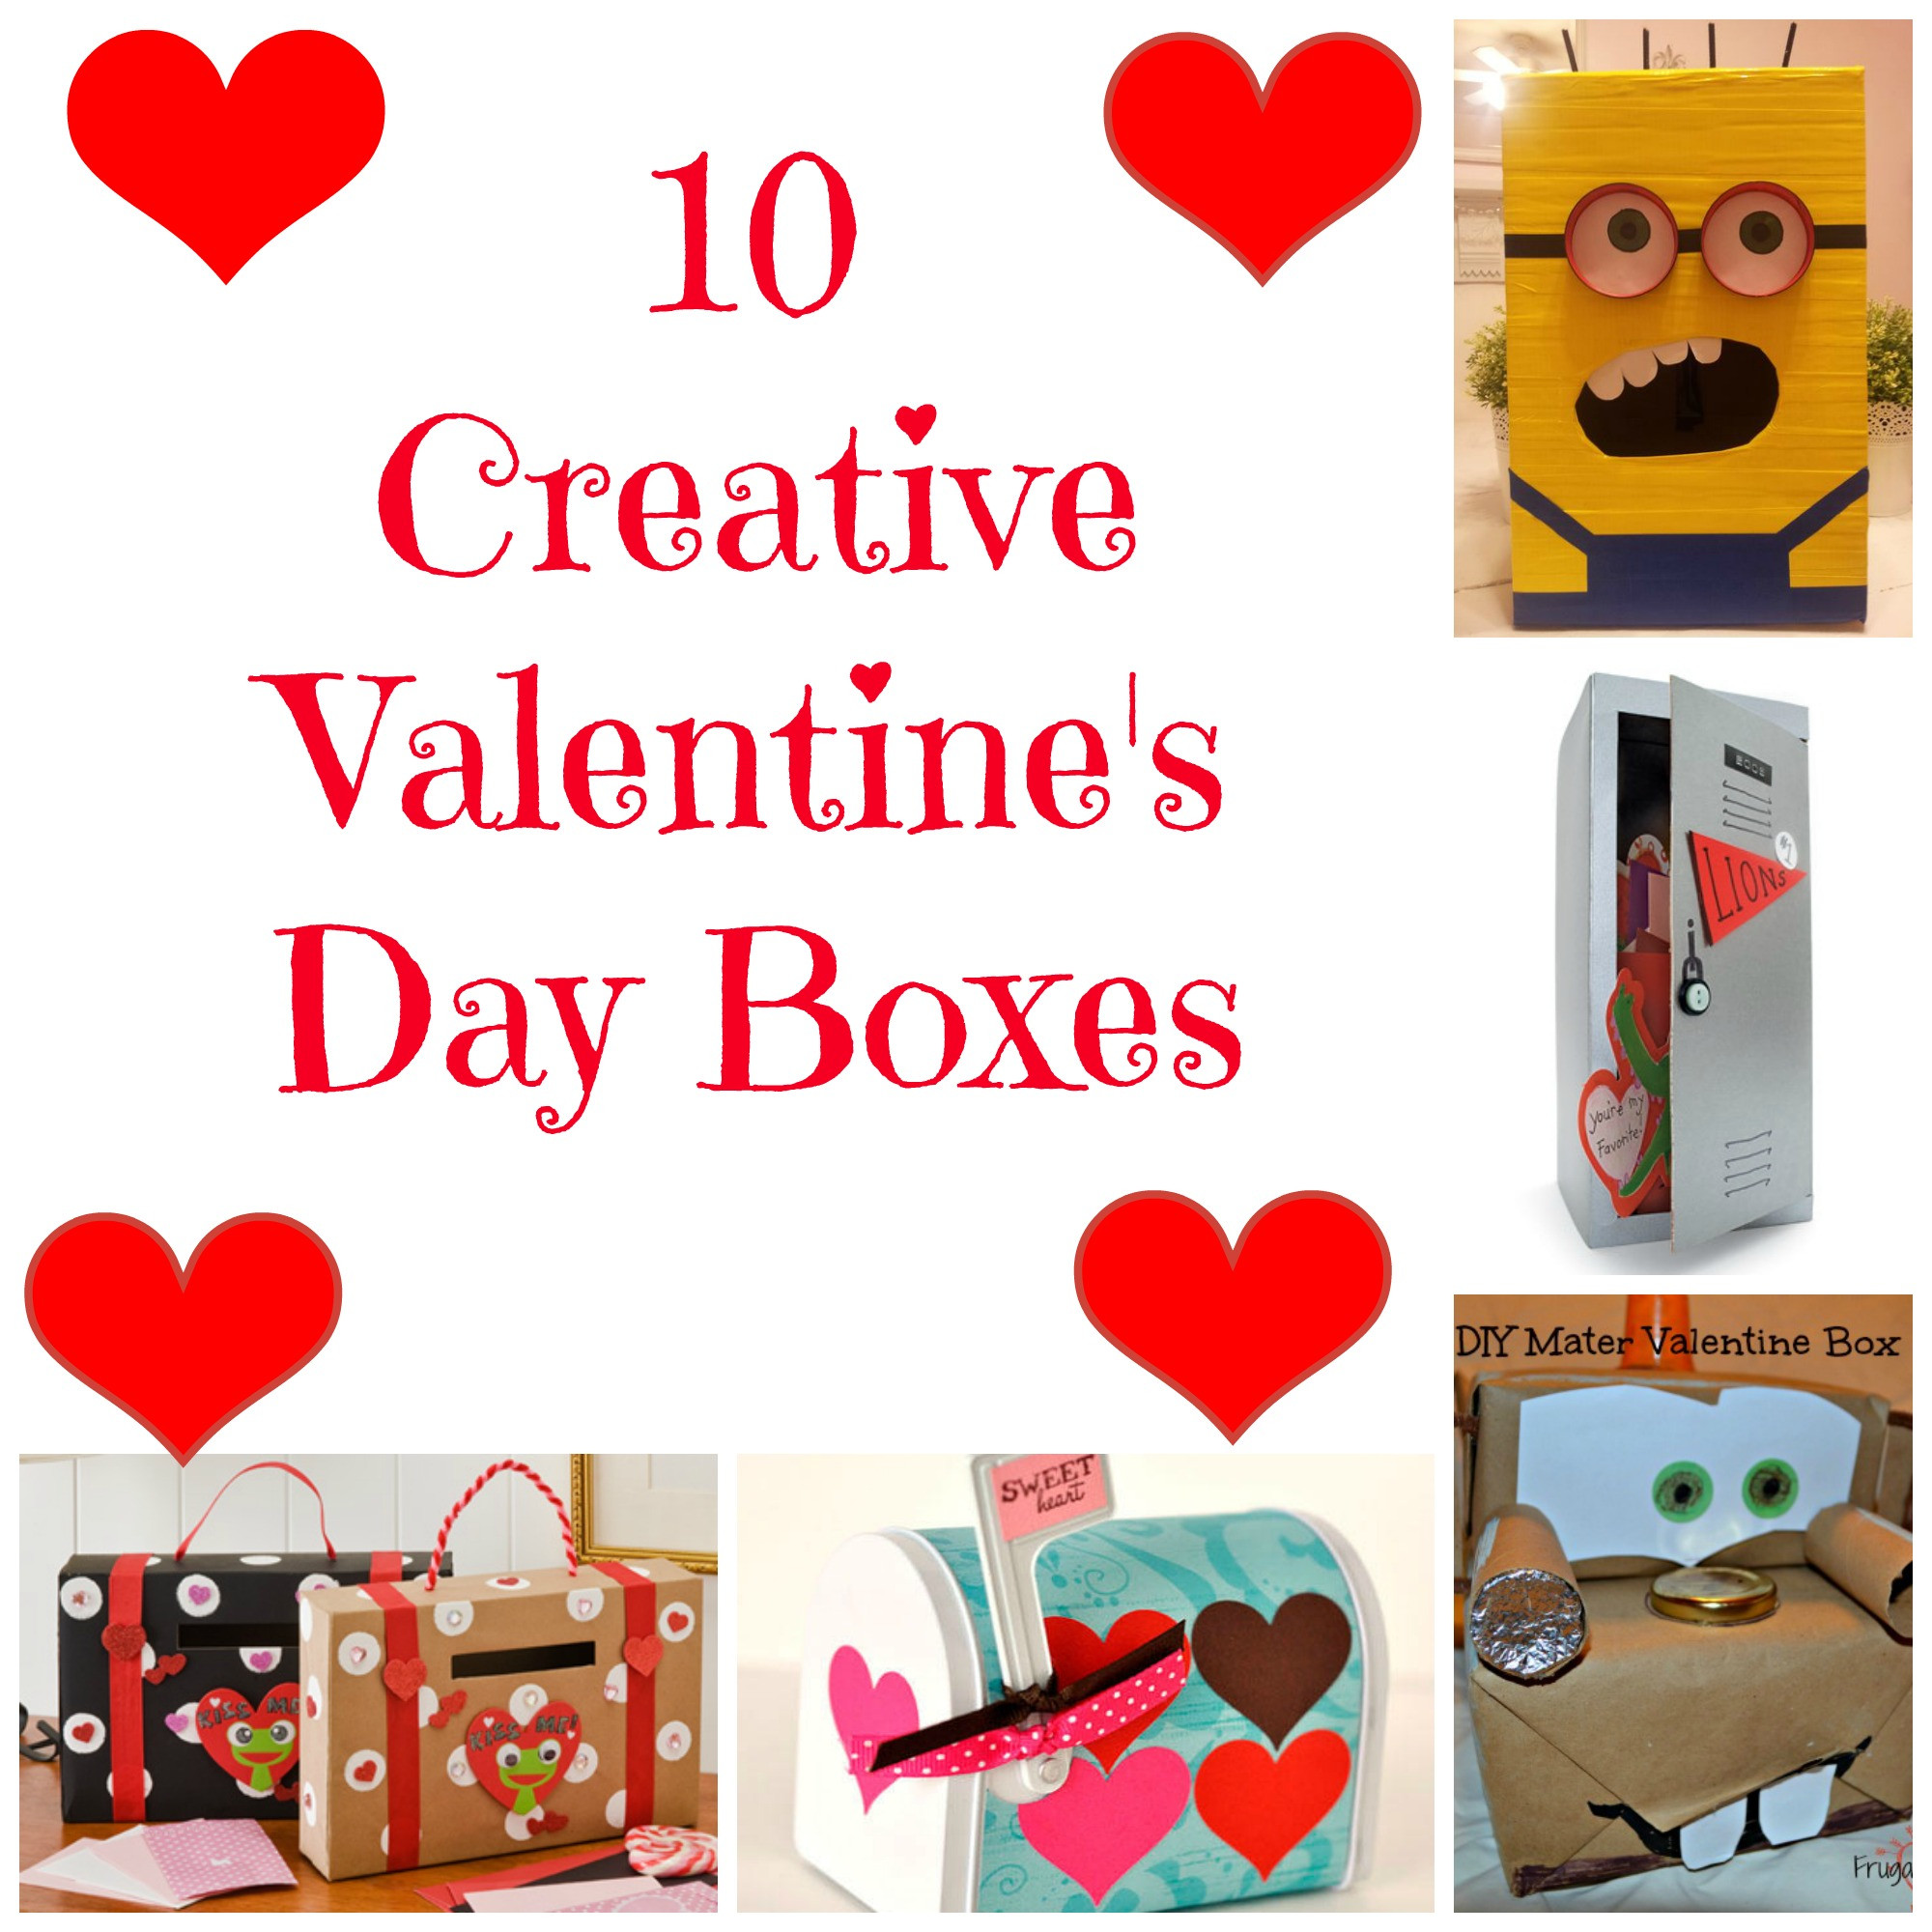 Creatives Ideas For Valentines Day
 Valentine s Day Box Ideas for Kids to Make